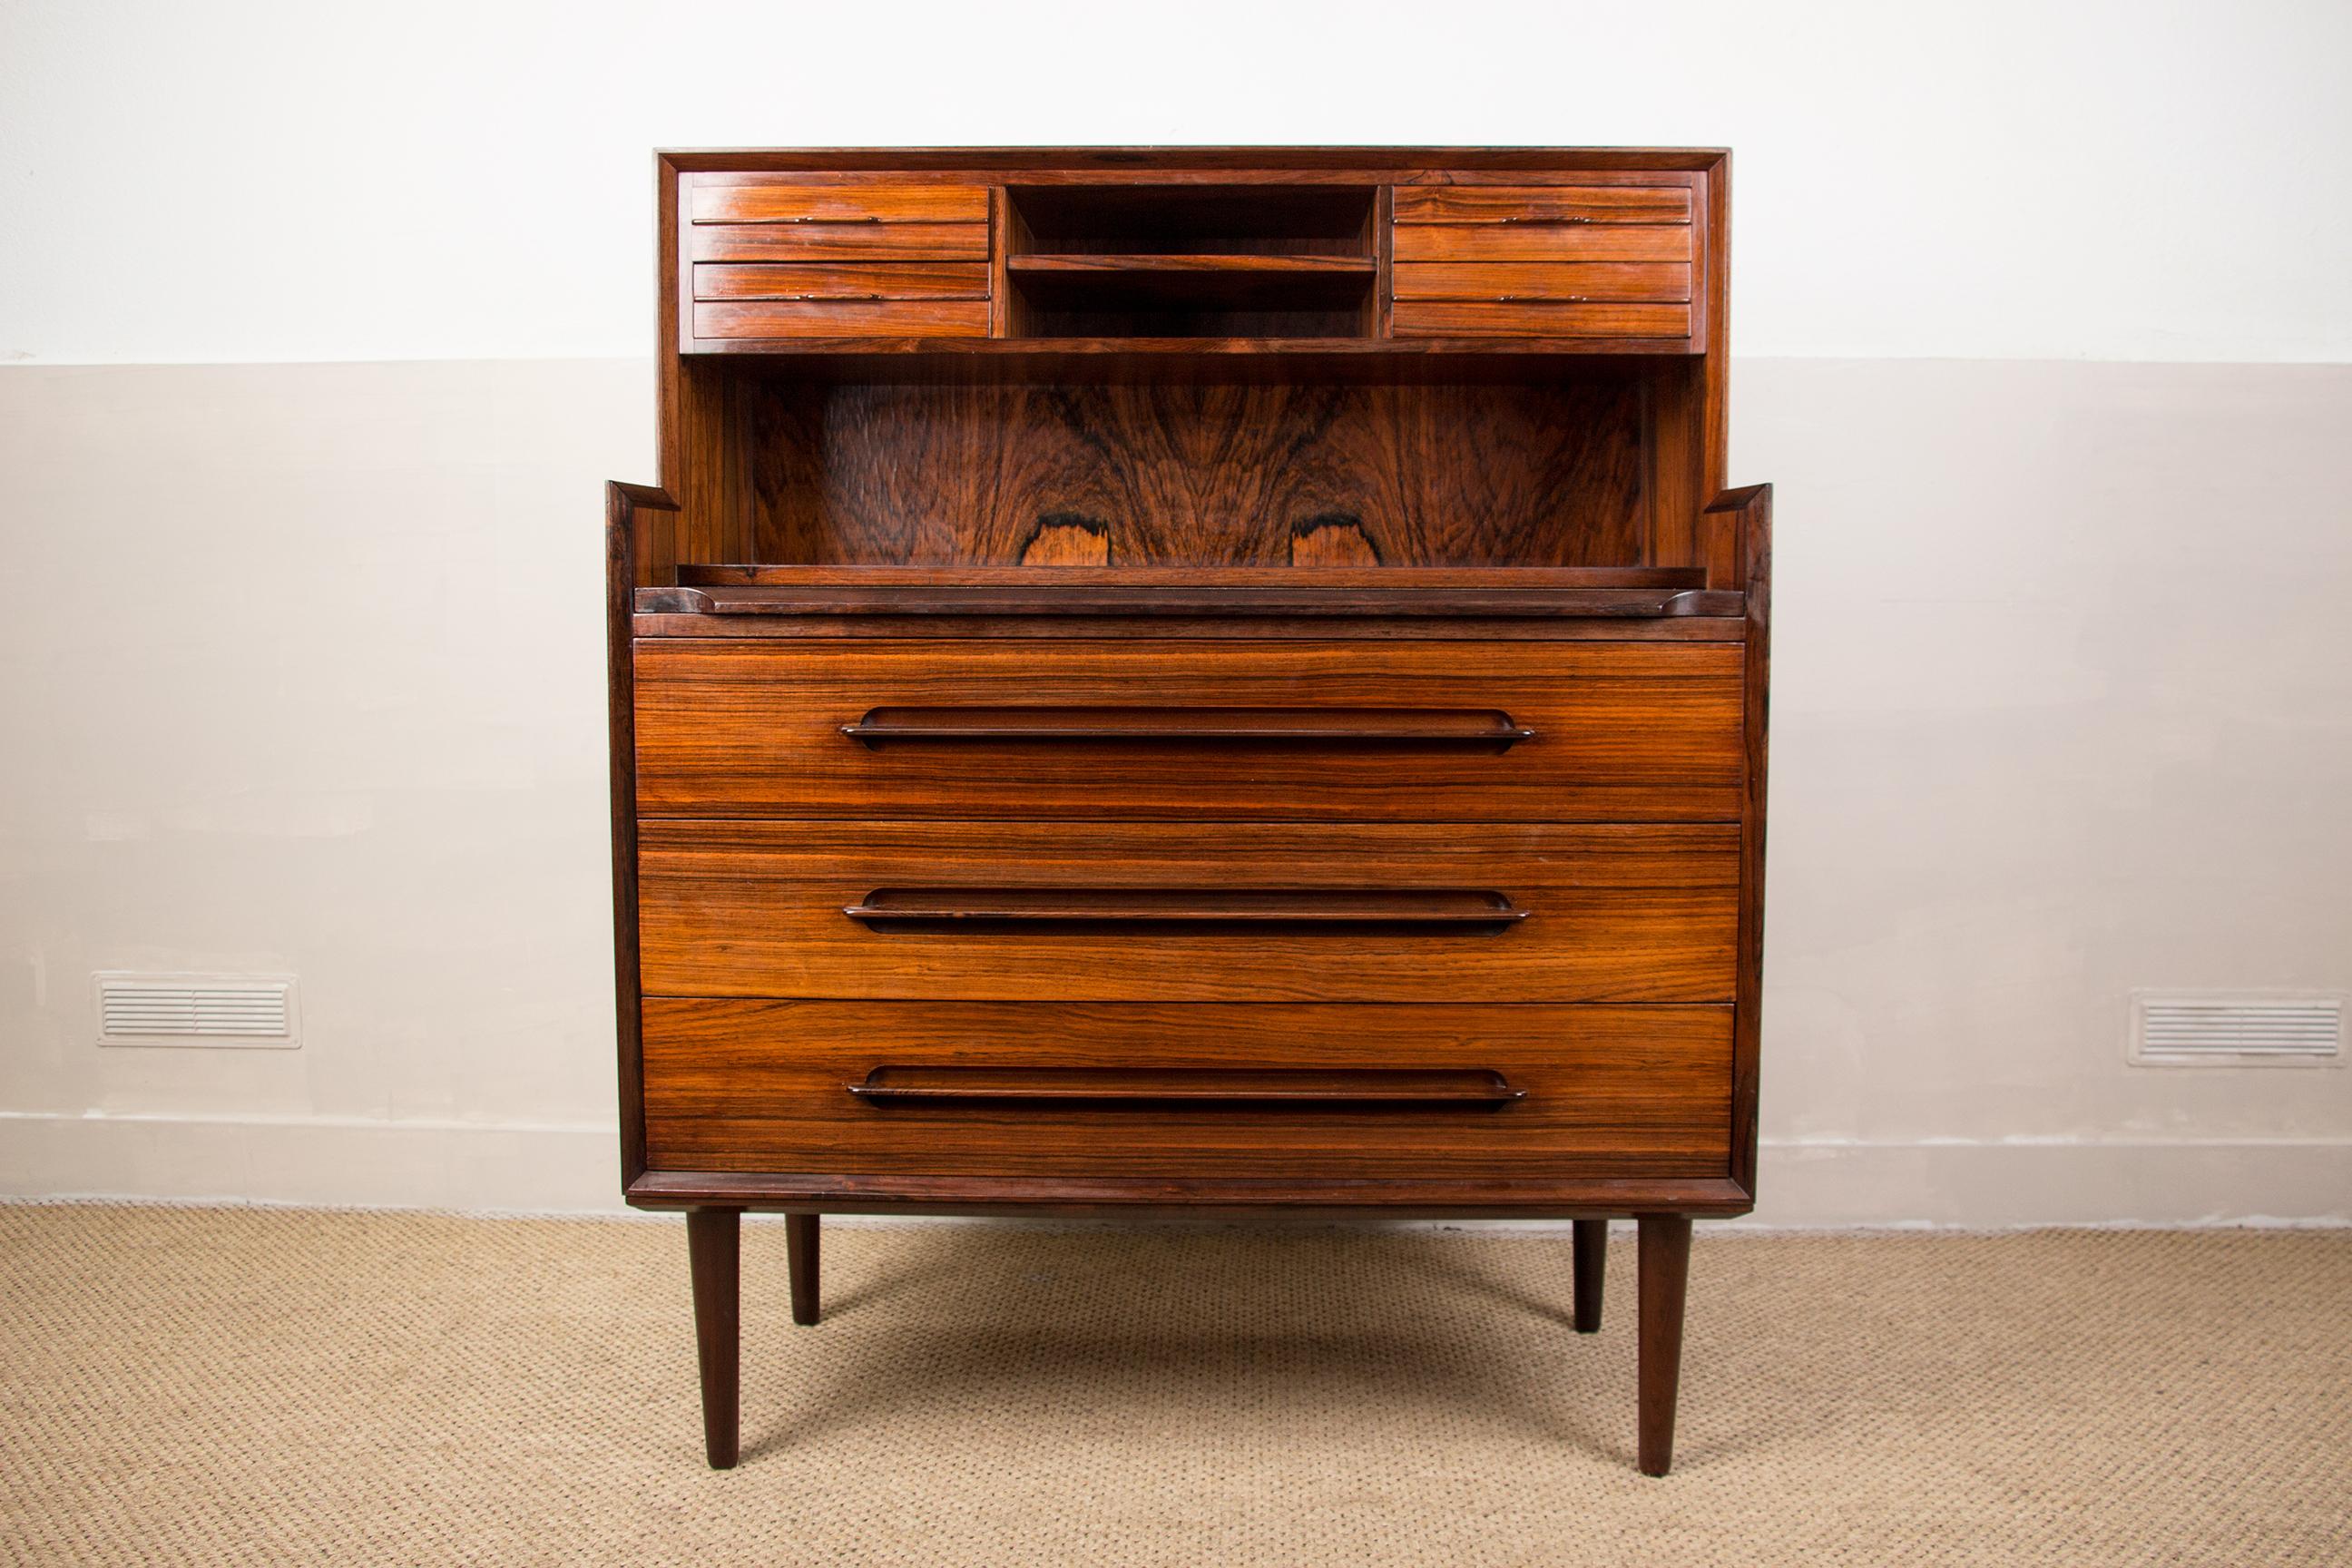 Superb Scandinavian secretary which presents, in its upper part, 4 small drawers, 2 small niches and a large niche, a retractable writing desk on its central part and 3 large drawers on the lower part. Splendid design furniture, sober and very